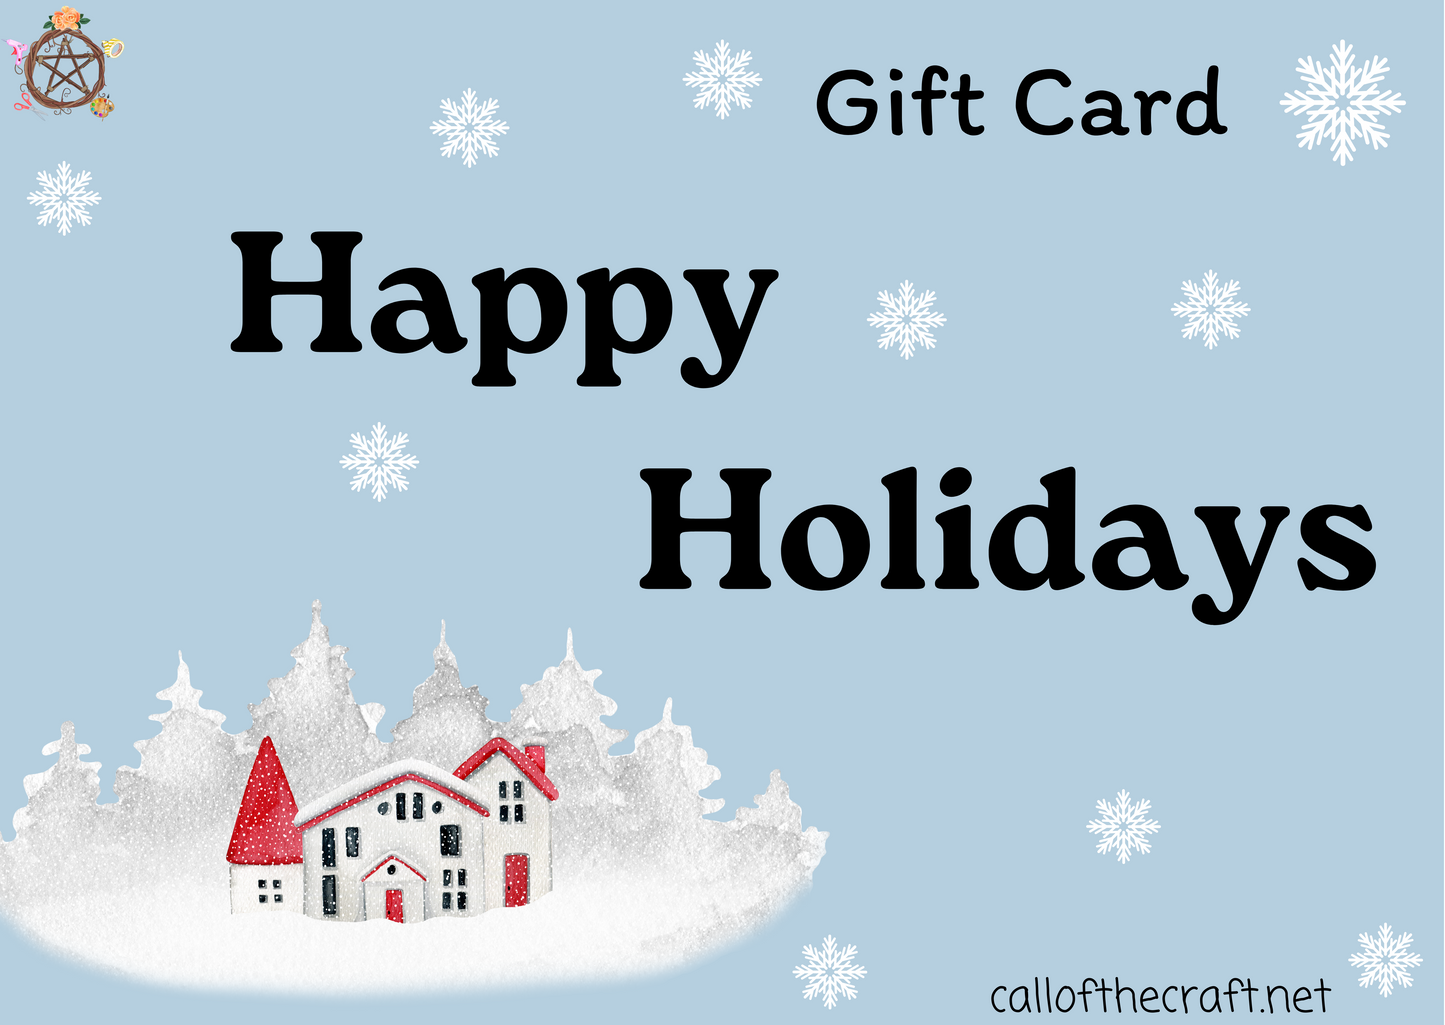 Happy Holidays Gift Card - The Call of the Craft